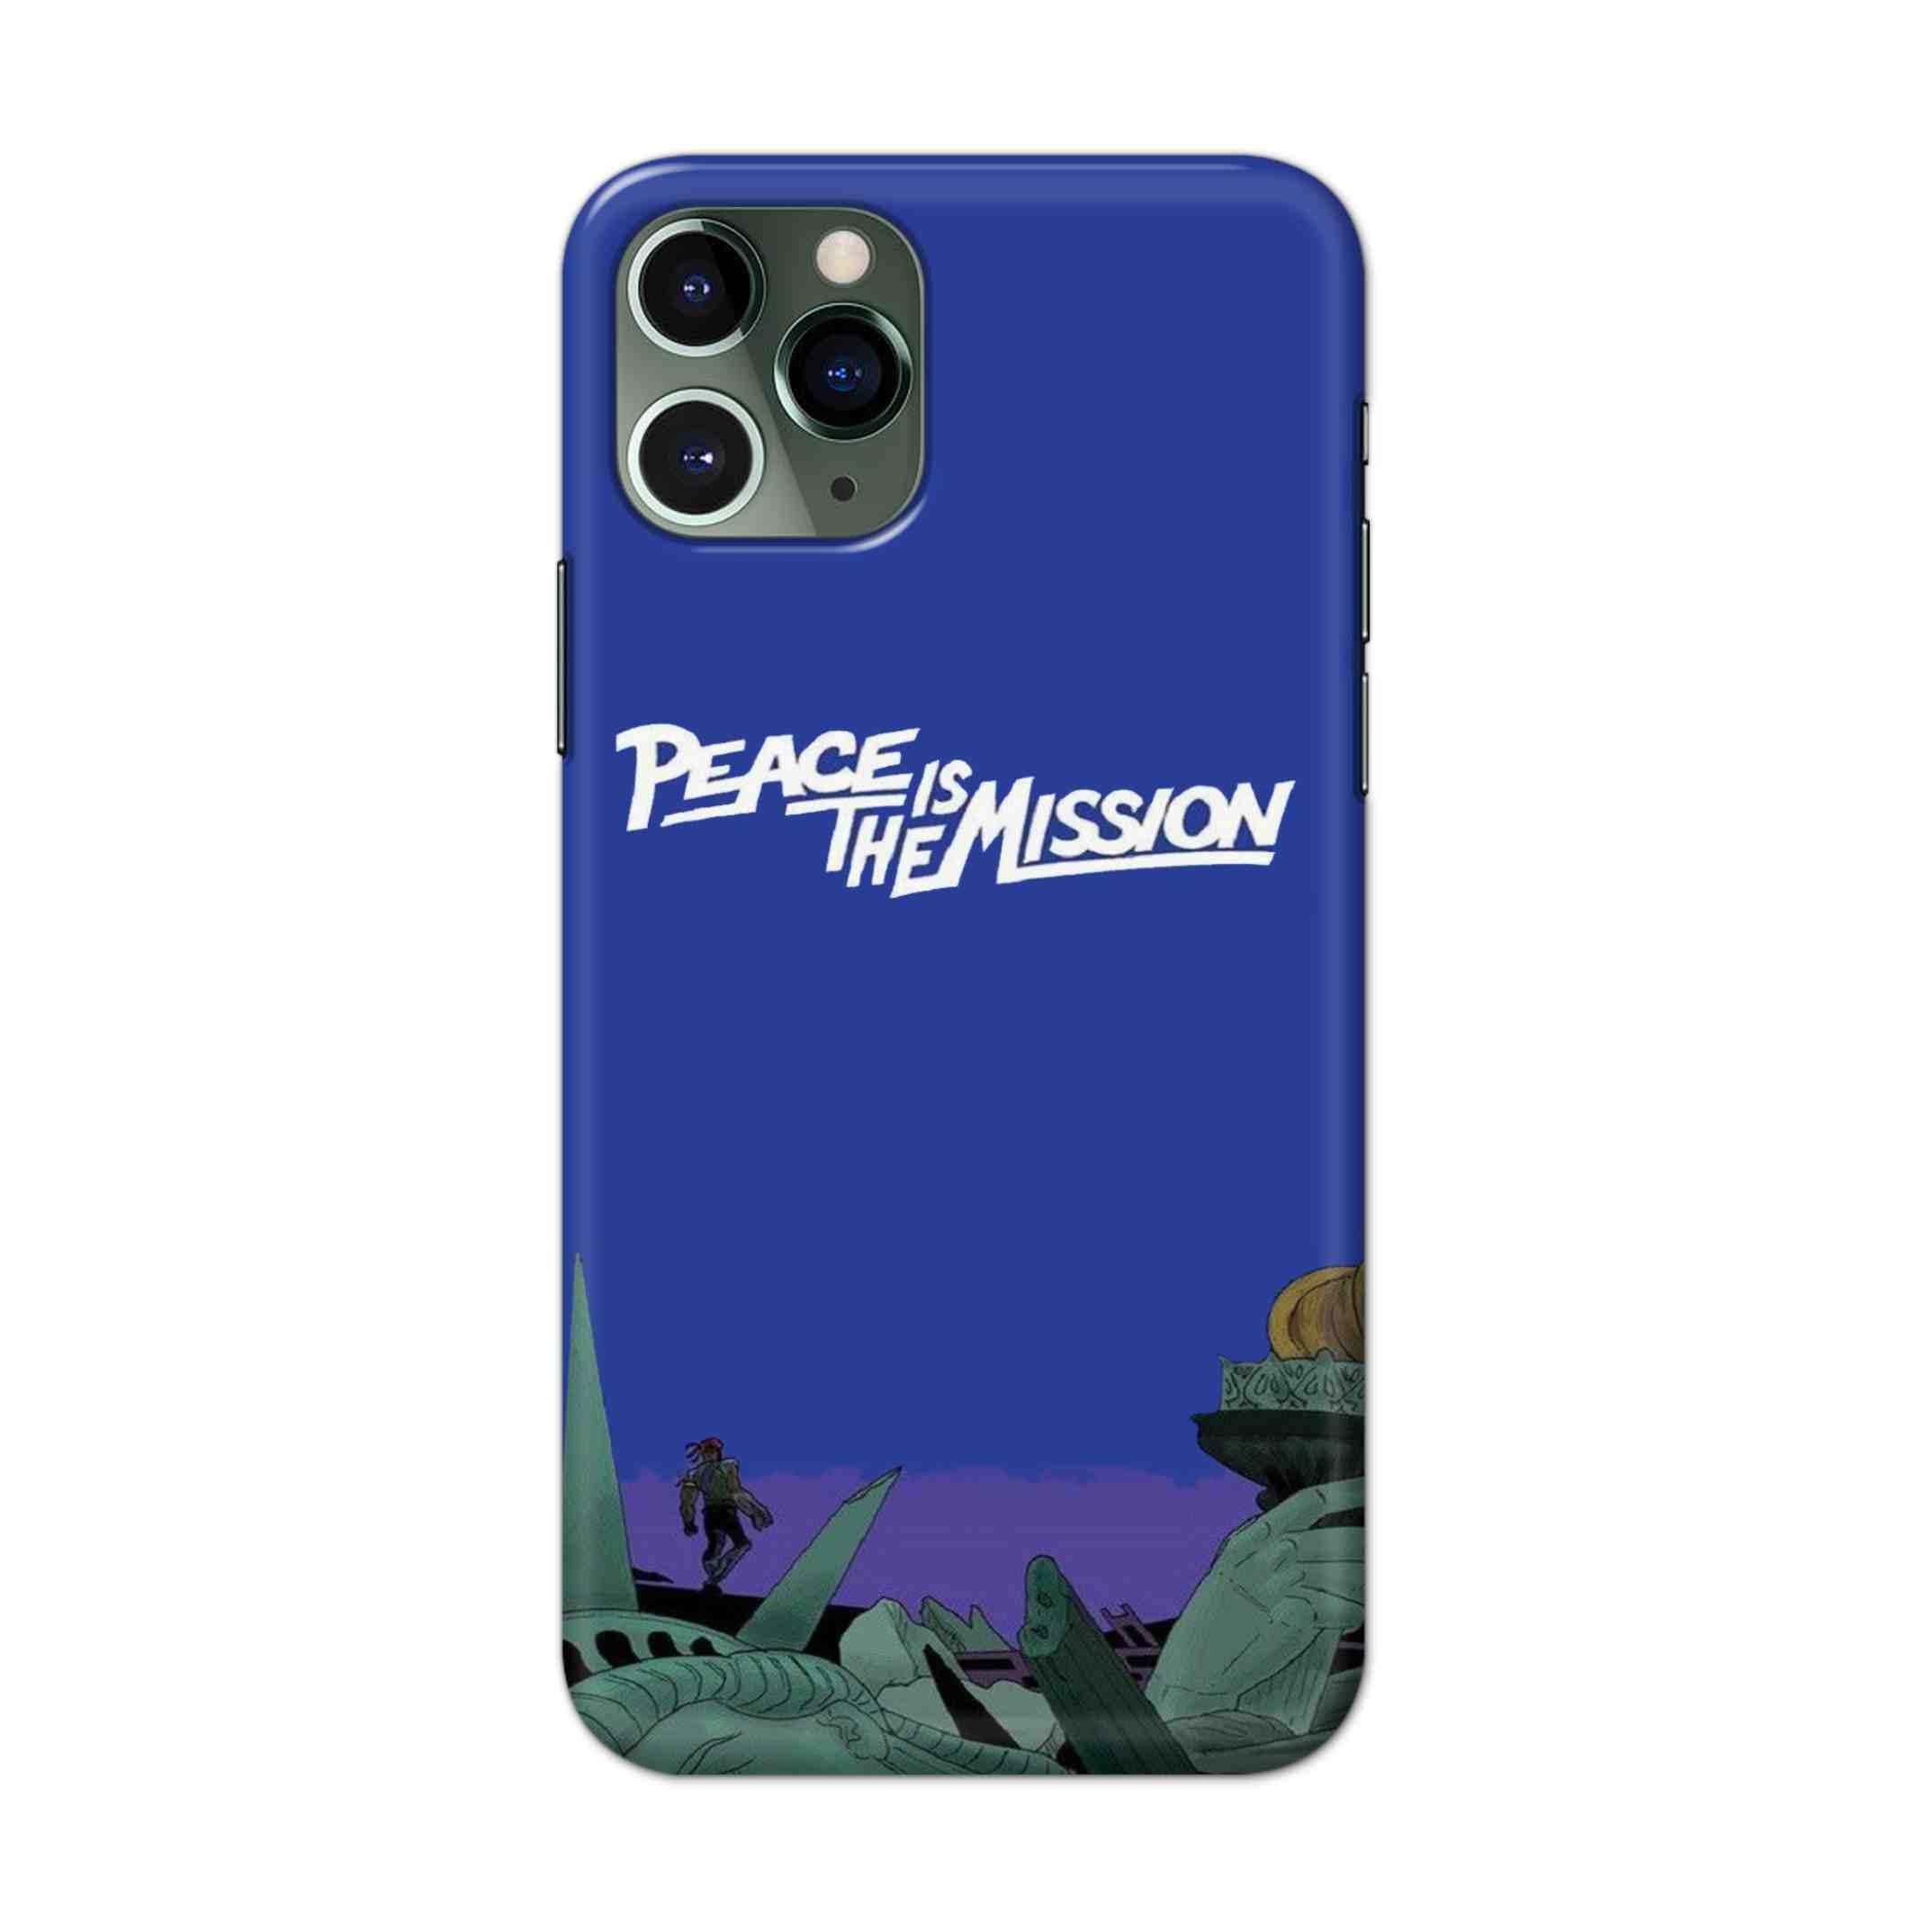 Buy Peace Is The Misson Hard Back Mobile Phone Case/Cover For iPhone 11 Pro Max Online